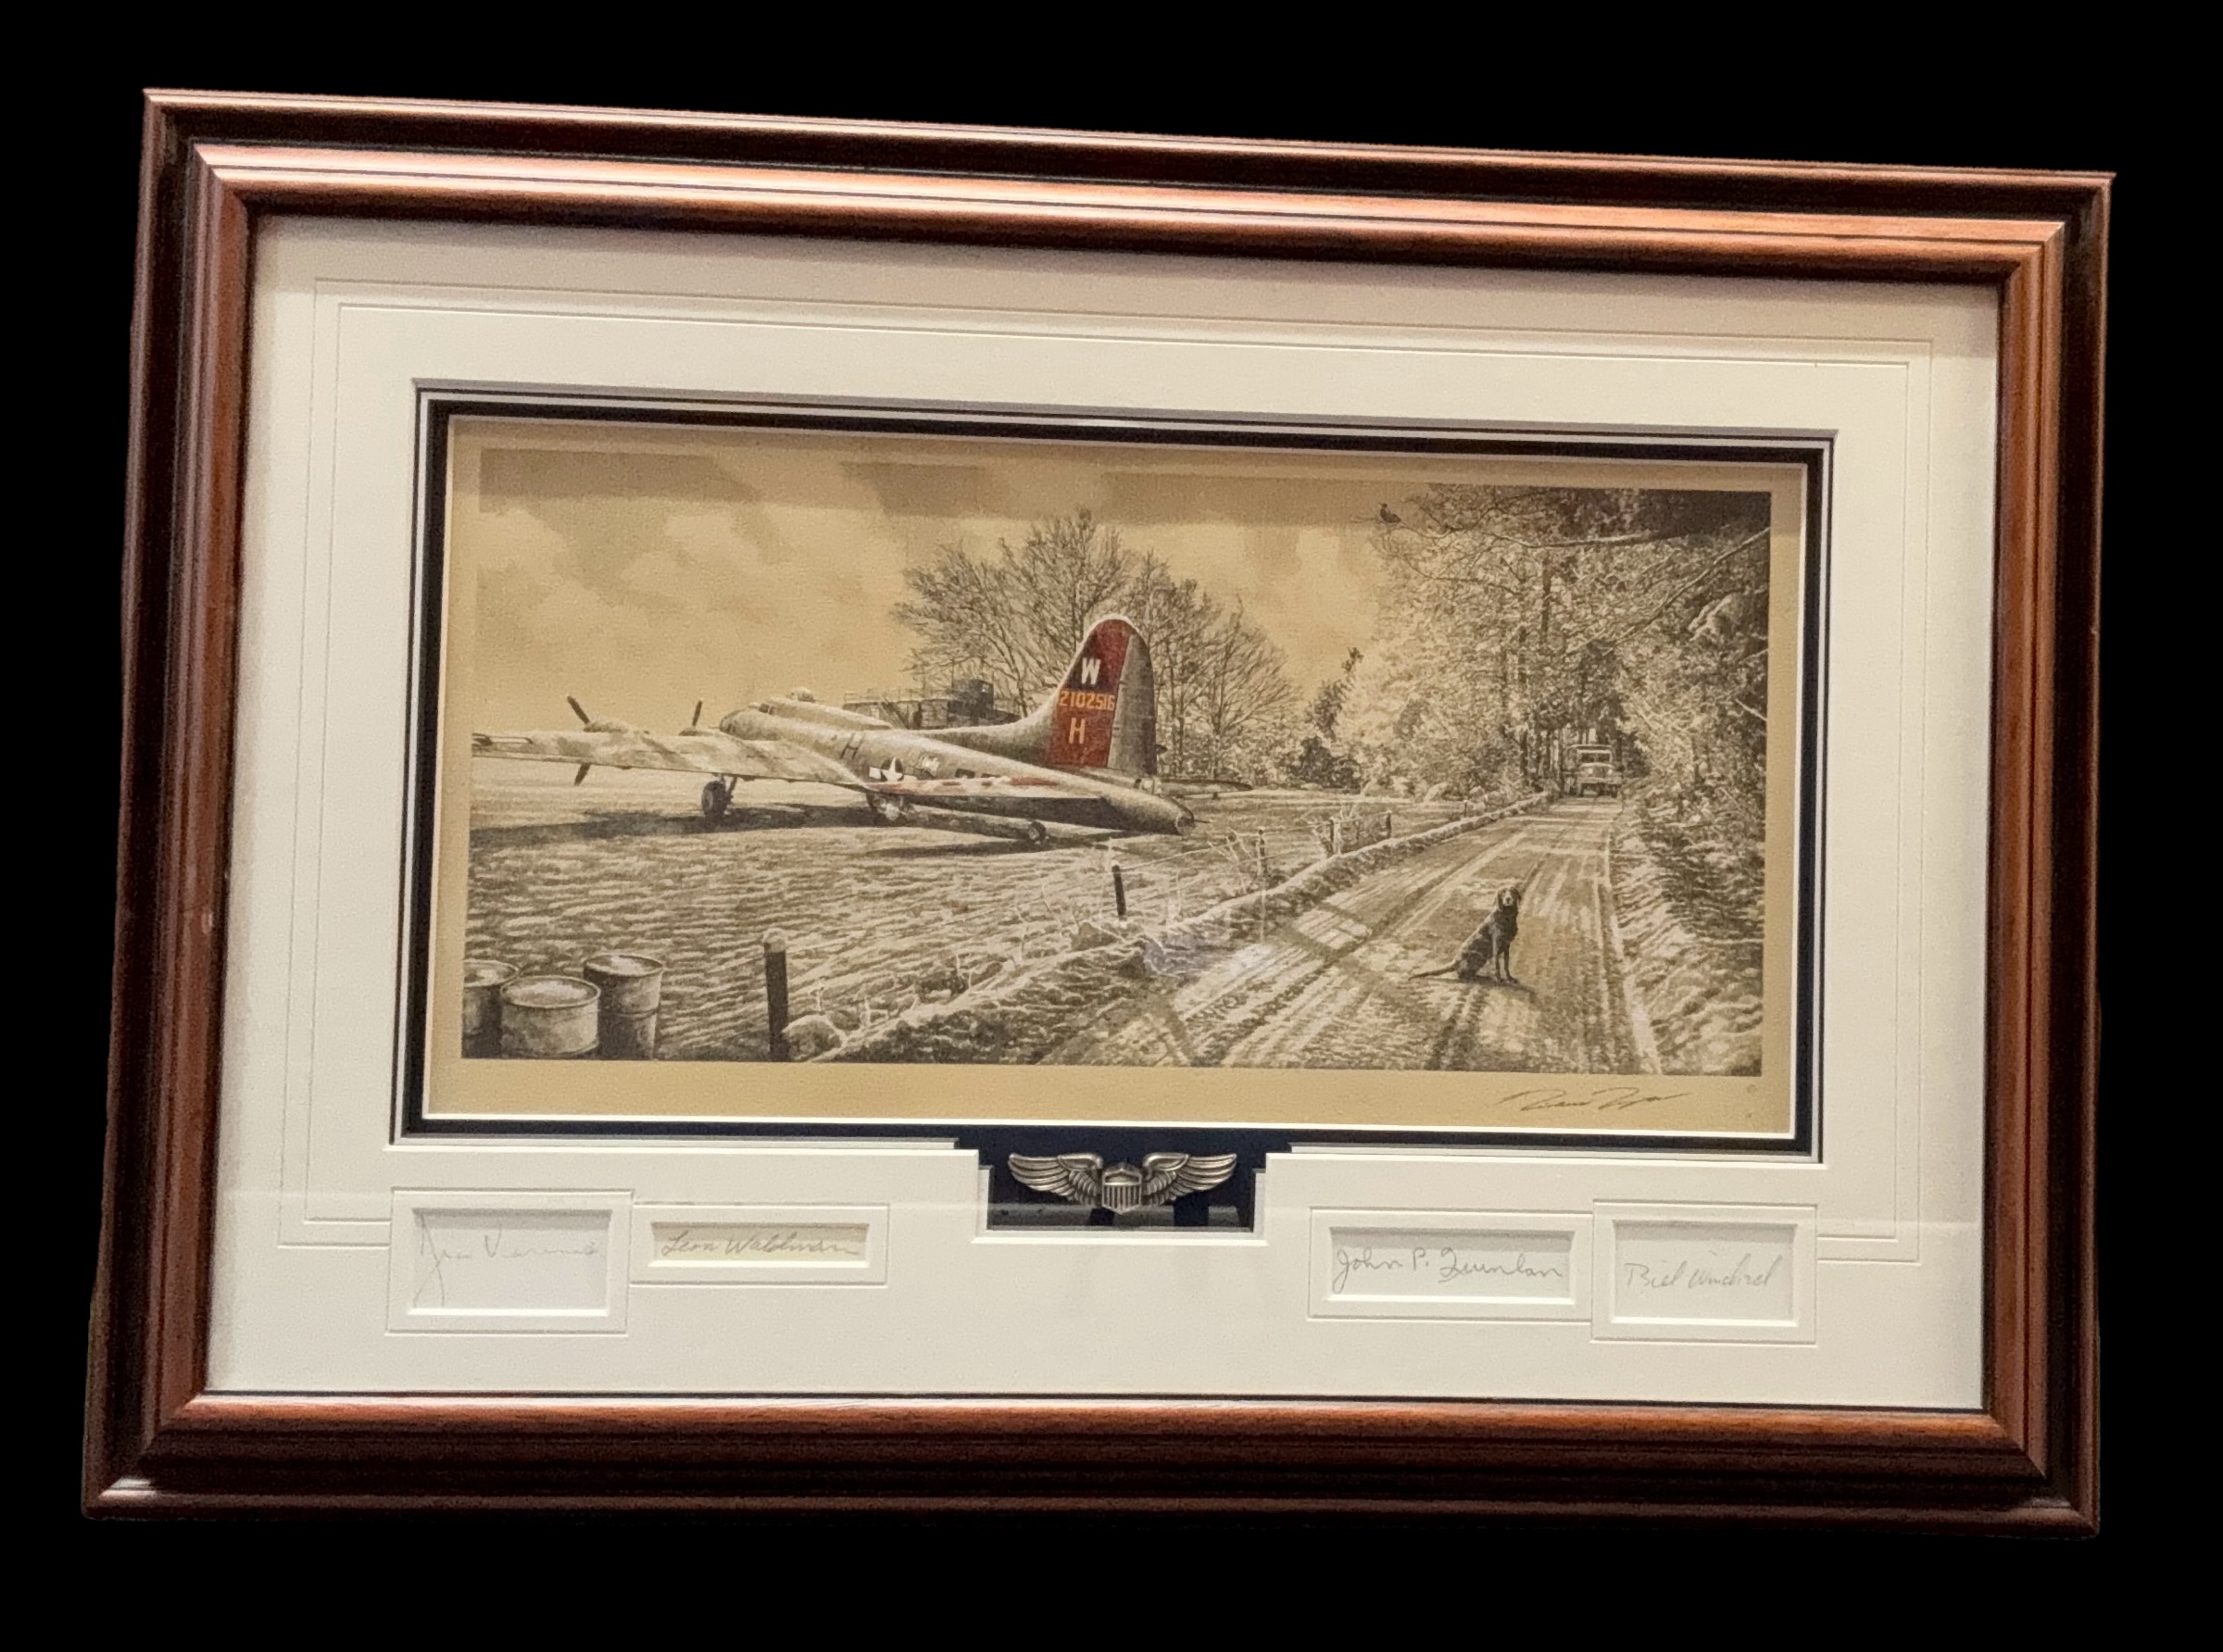 WW2 Print titled Fortress at Rest by Richard Taylor, multi signed by the artist Richard Taylor and - Image 3 of 3